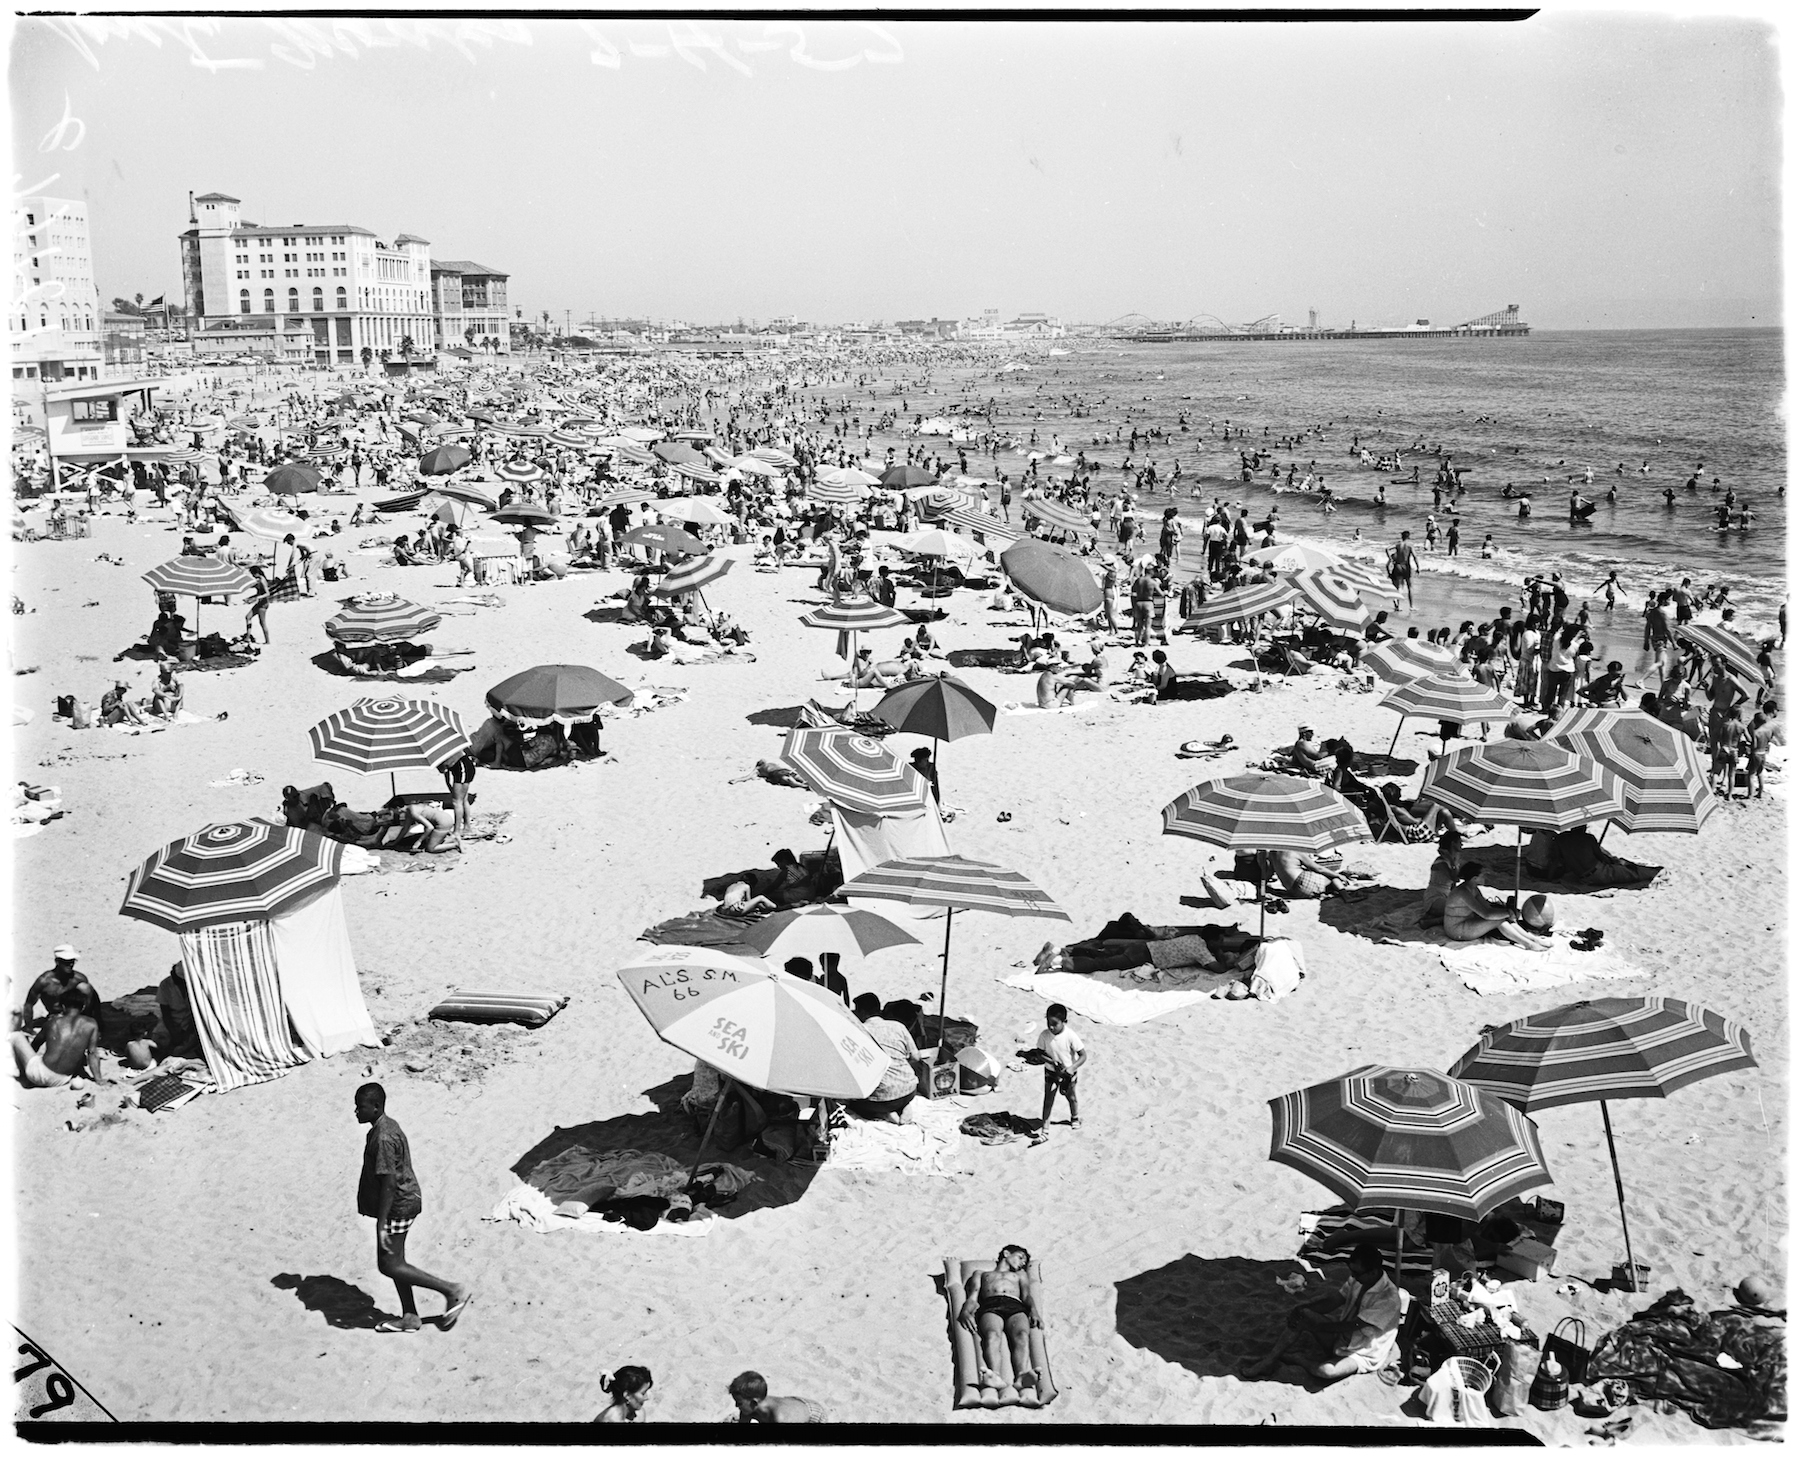 General views of crowd at Santa Monica beach, Santa Monica, California, April 13, 1958. Nick Gabaldón Day now celebrates the contributions of black surfers in California to combatting racism on the beaches. (Photo by USC Libraries/Corbis via Getty Images)